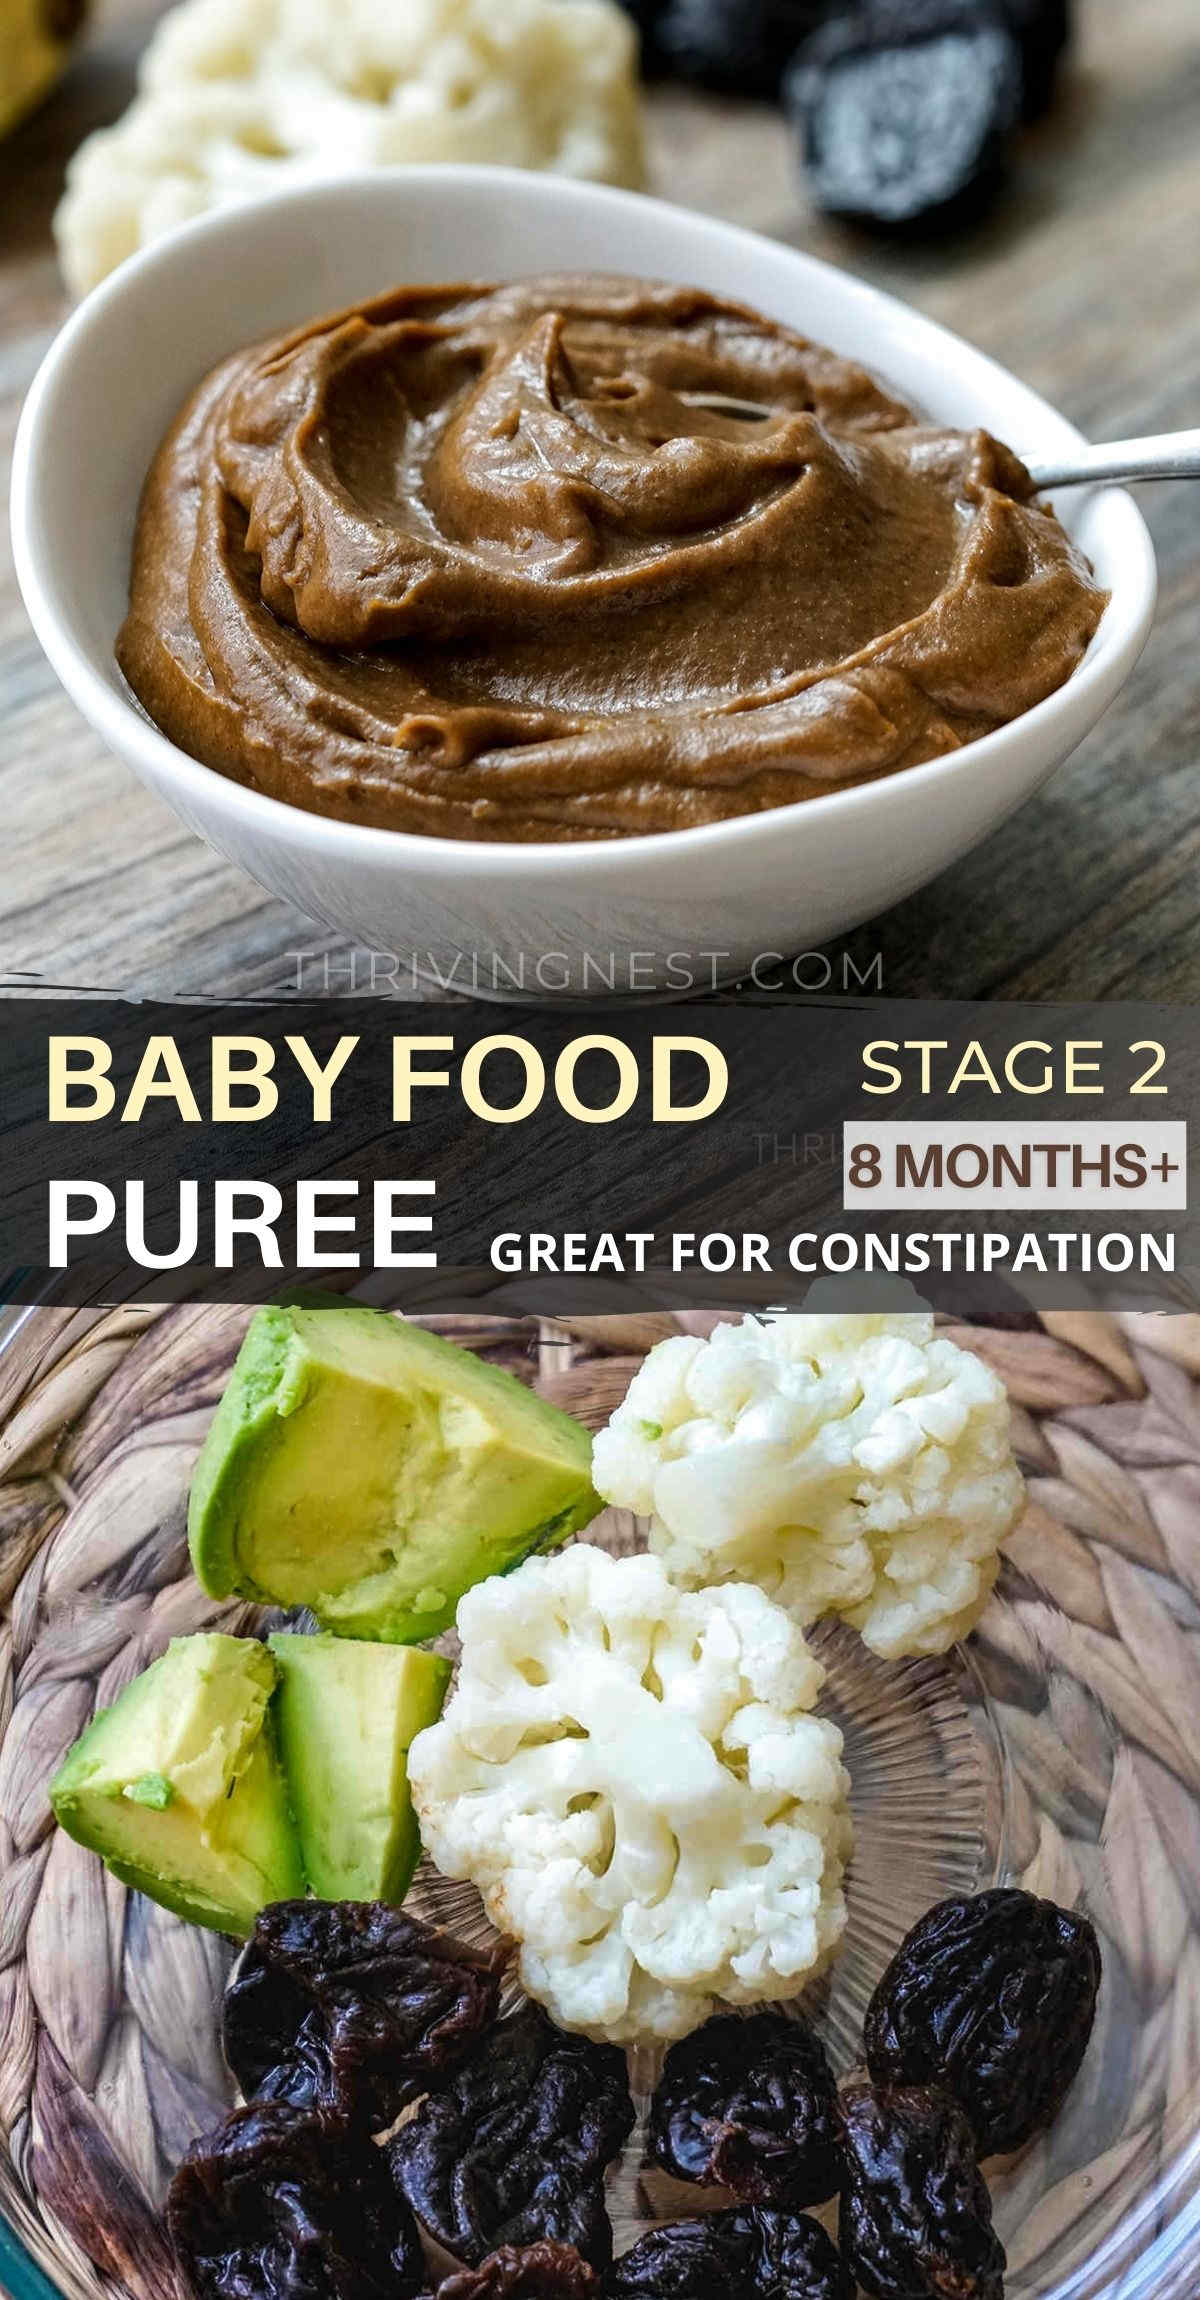 Creamy baby food puree combination as stage 2 baby food, suitable for babies 8 months and up including baby led weaning.  This baby puree recipe yields a smooth and creamy consistency with a touch of sweetness and provides enough fiber to helps relieve your baby's constipation. #avocado #prune #cauliflower #babypuree #babyfood #babyfoodpuree #babyfoodrecipes #babypureerecipes #stage2 #constipation